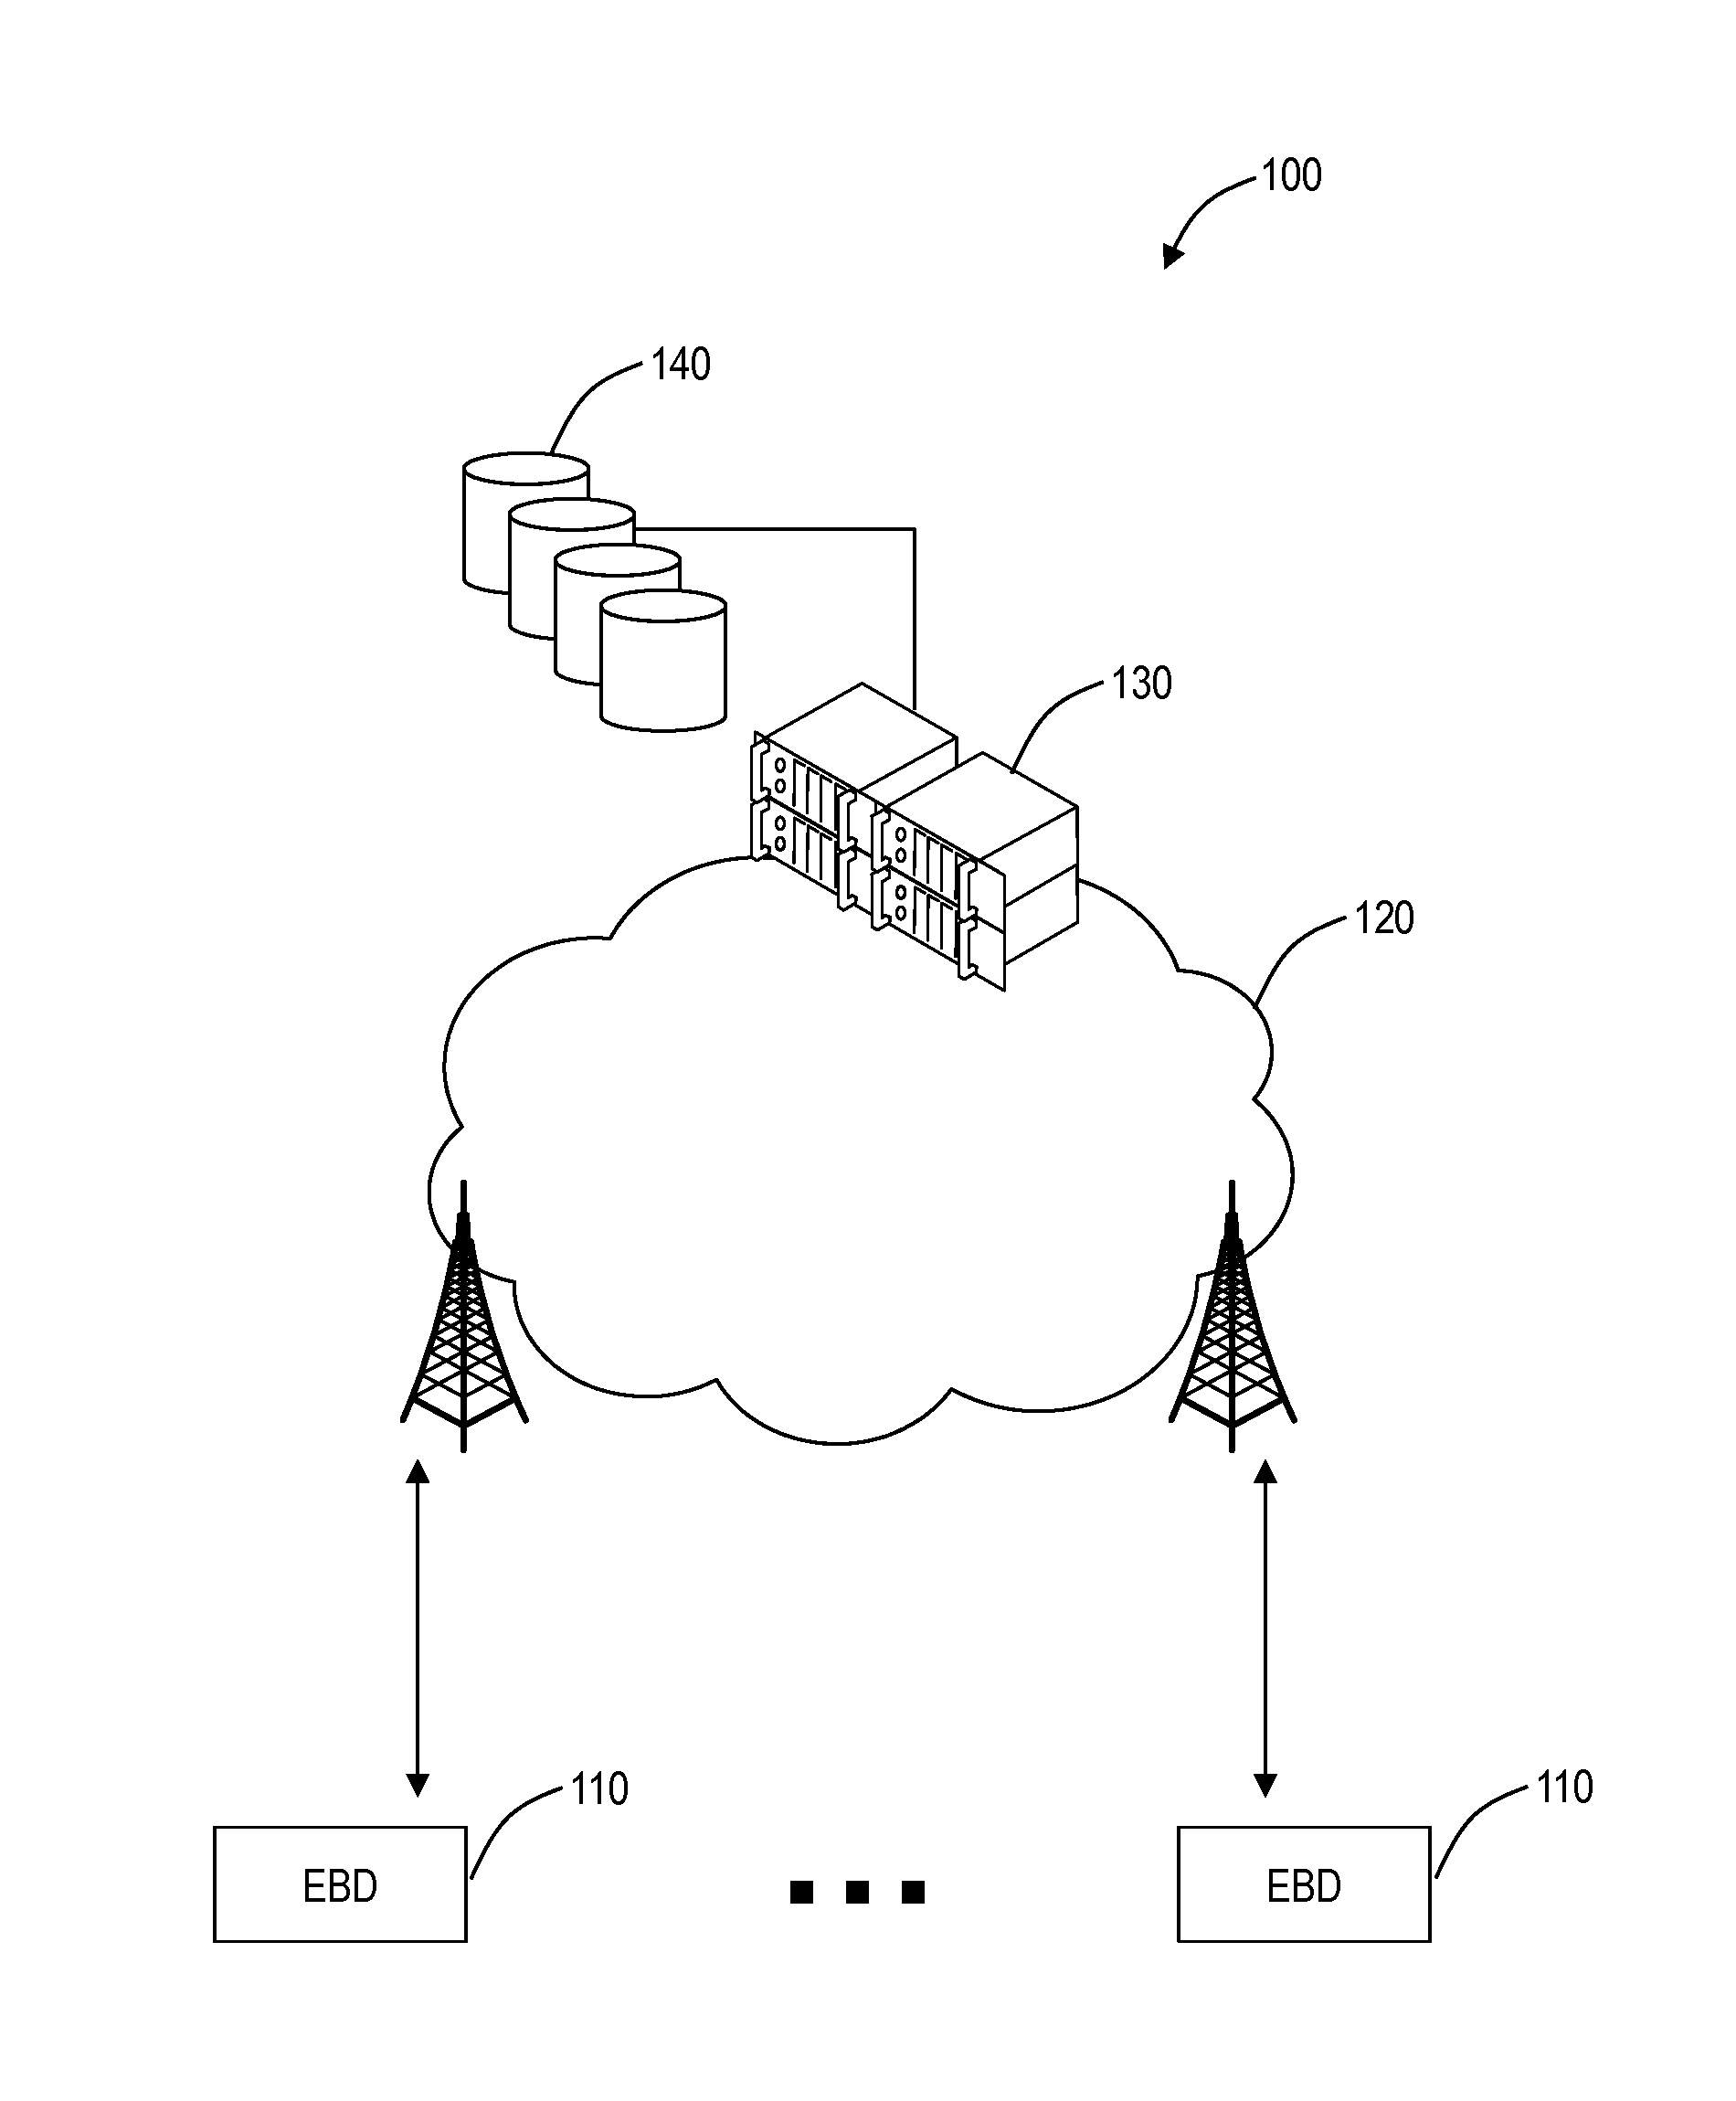 Ear-based wearable networking device, system, and method